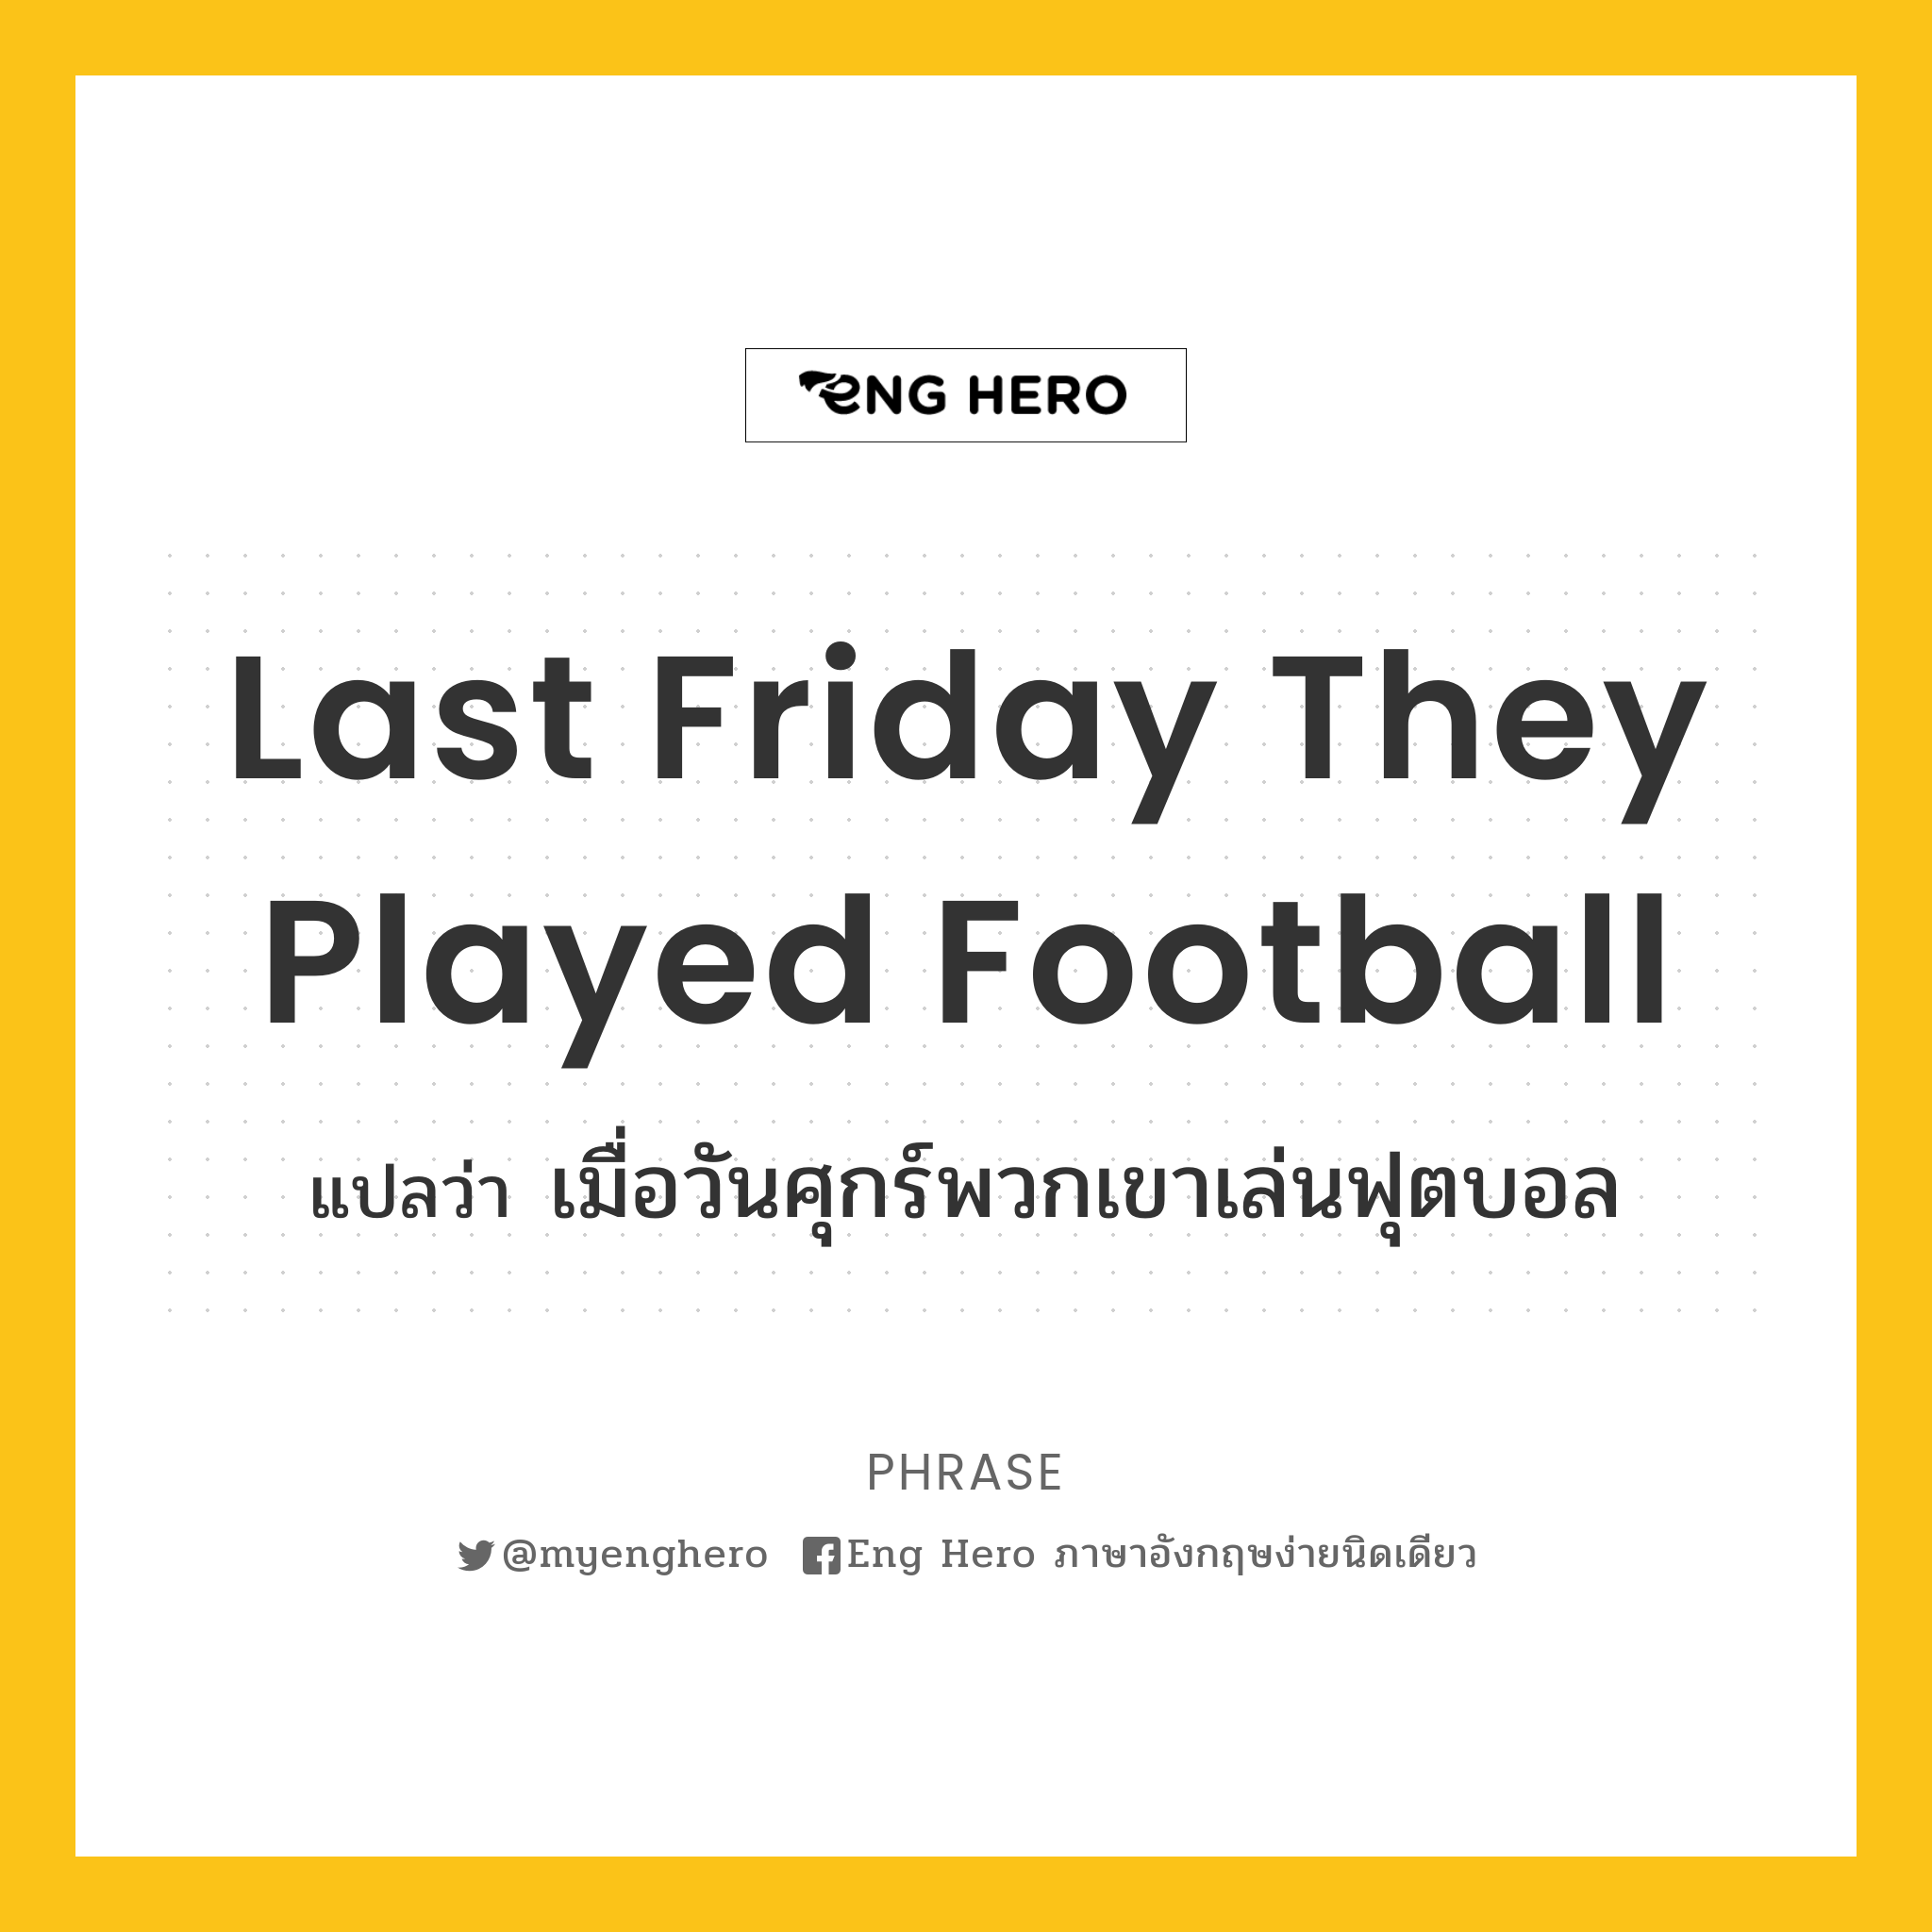 Last Friday they played football